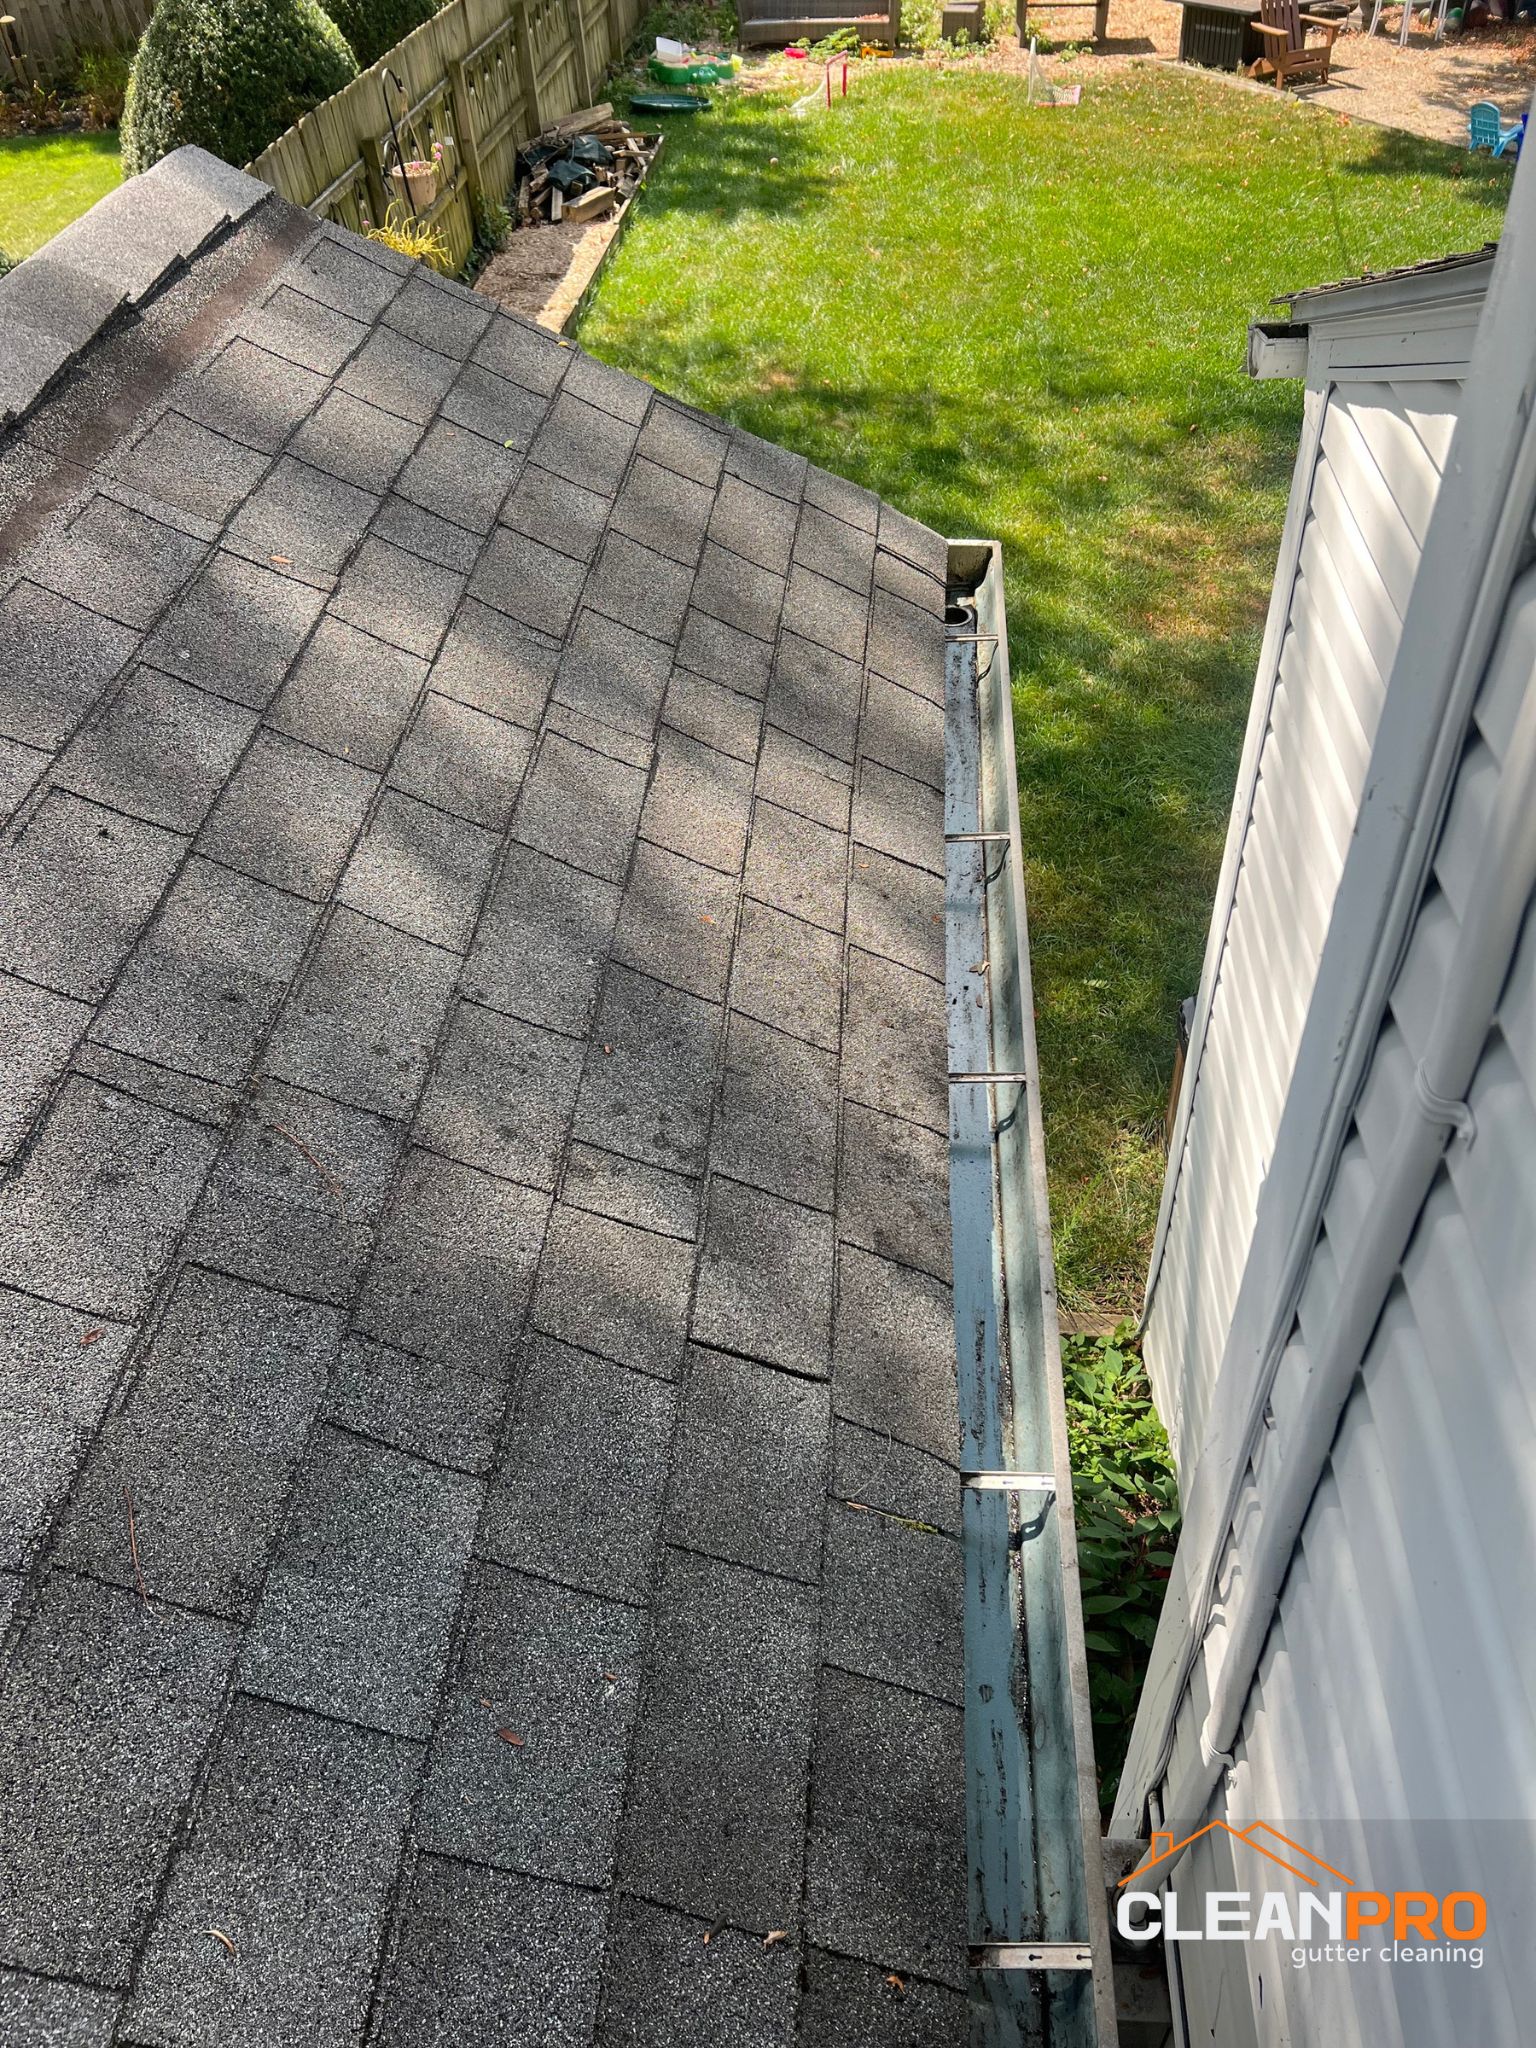 Top Notch Gutter Cleaning Service in Columbus